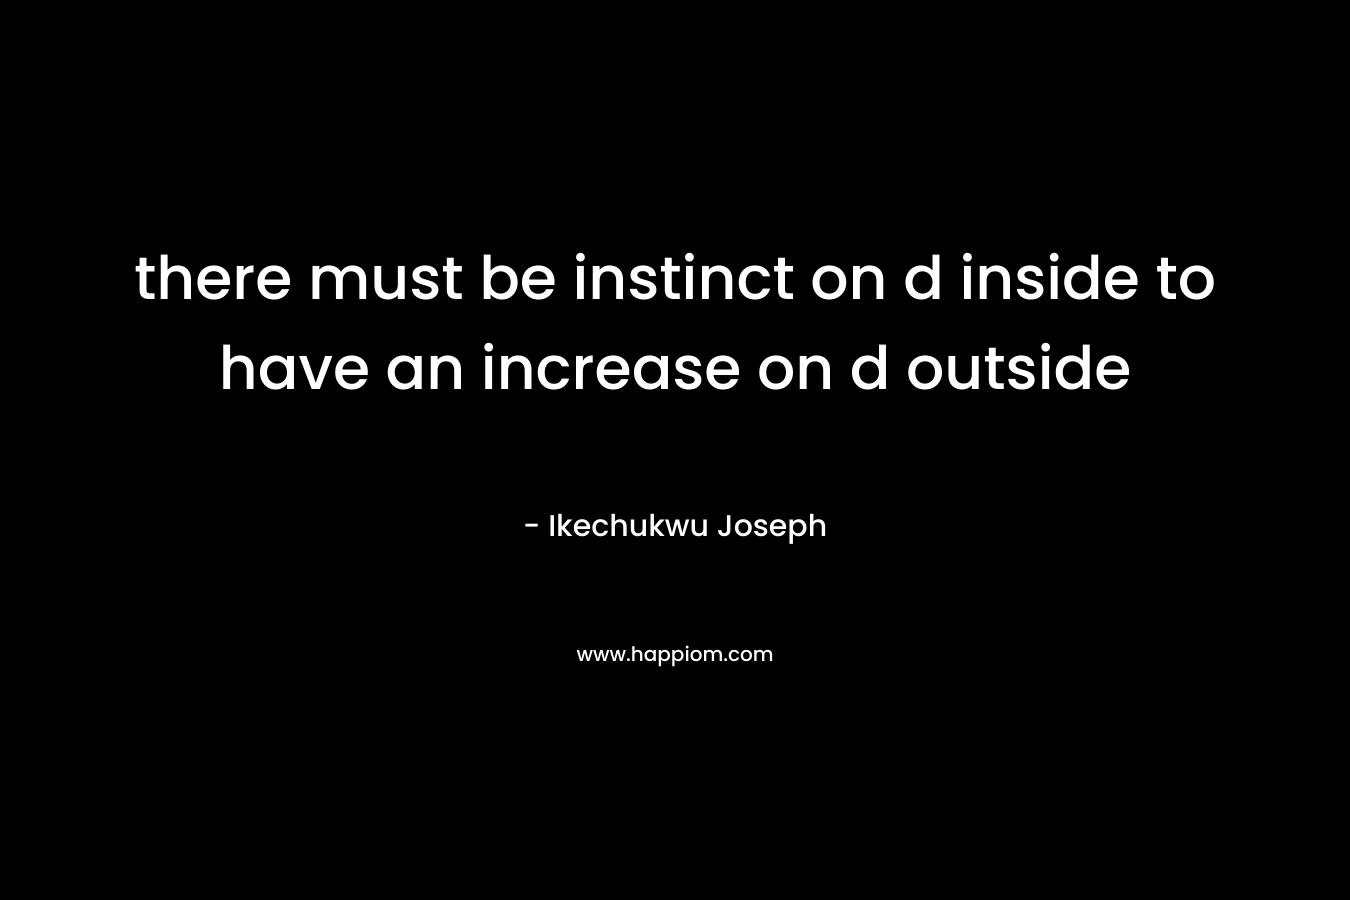 there must be instinct on d inside to have an increase on d outside